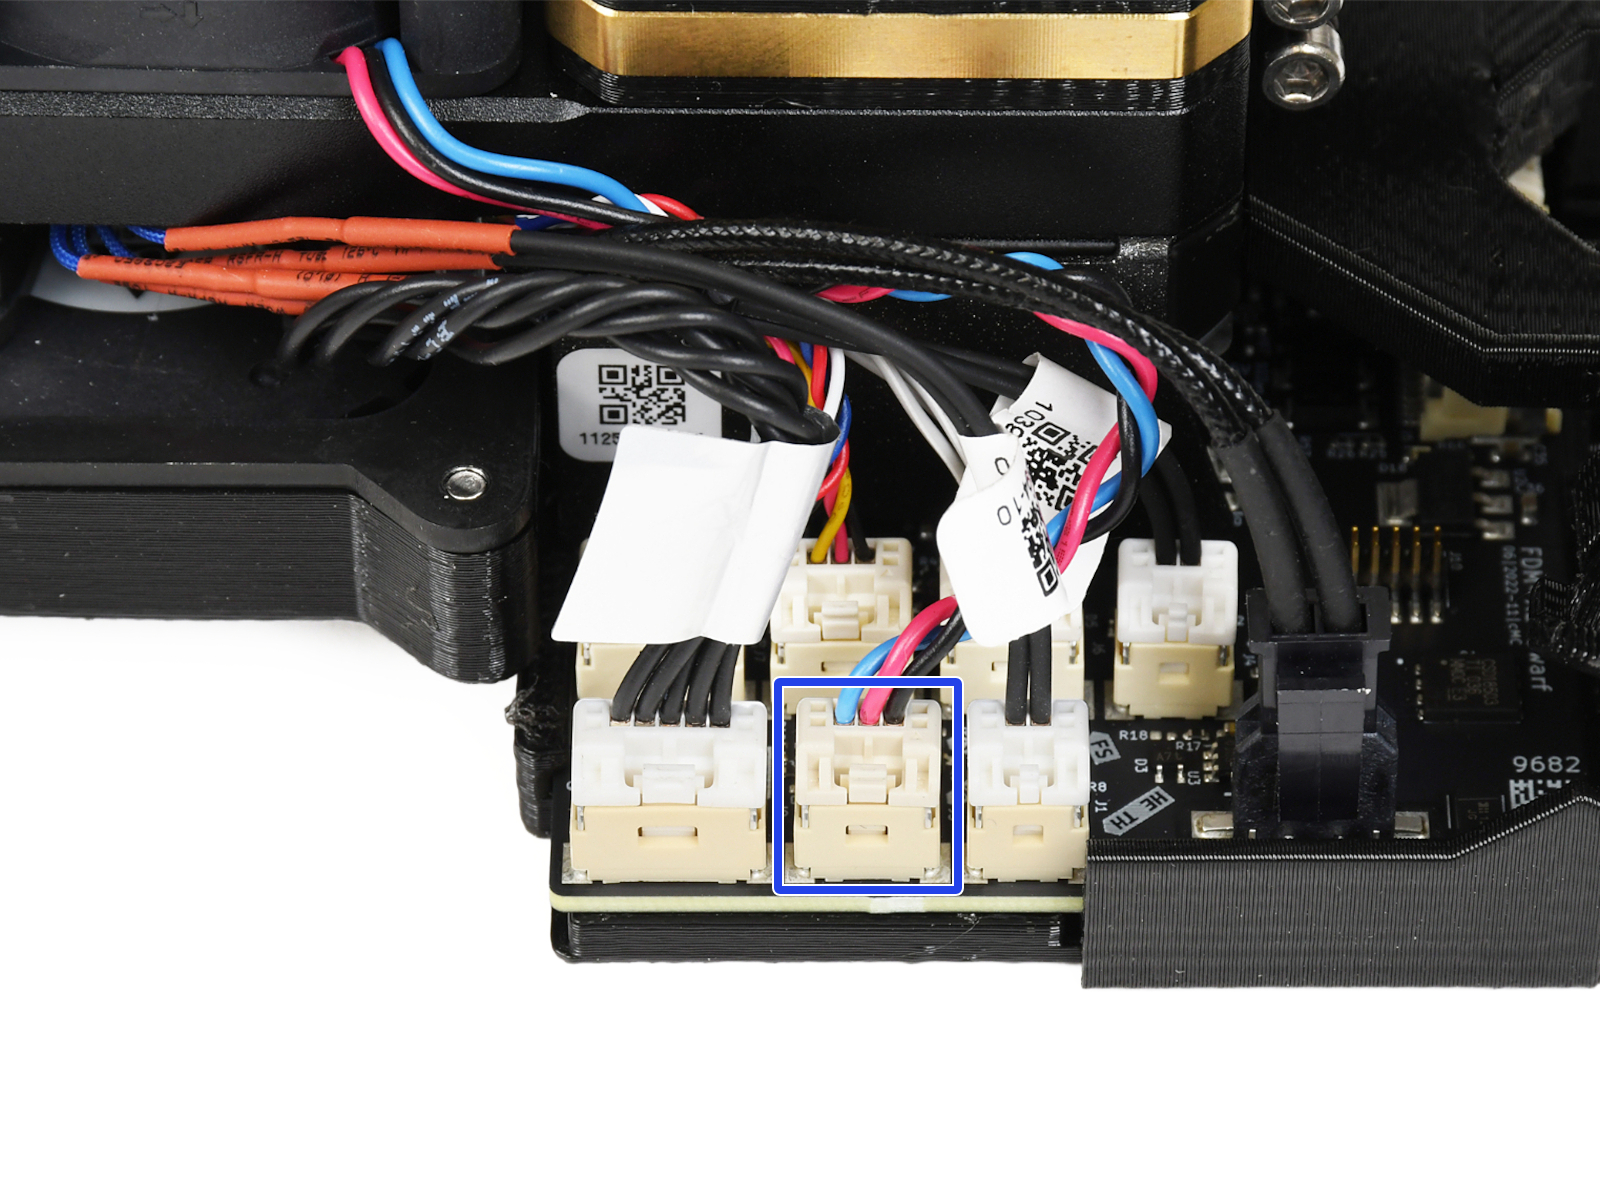 Unplugging the hotend fan